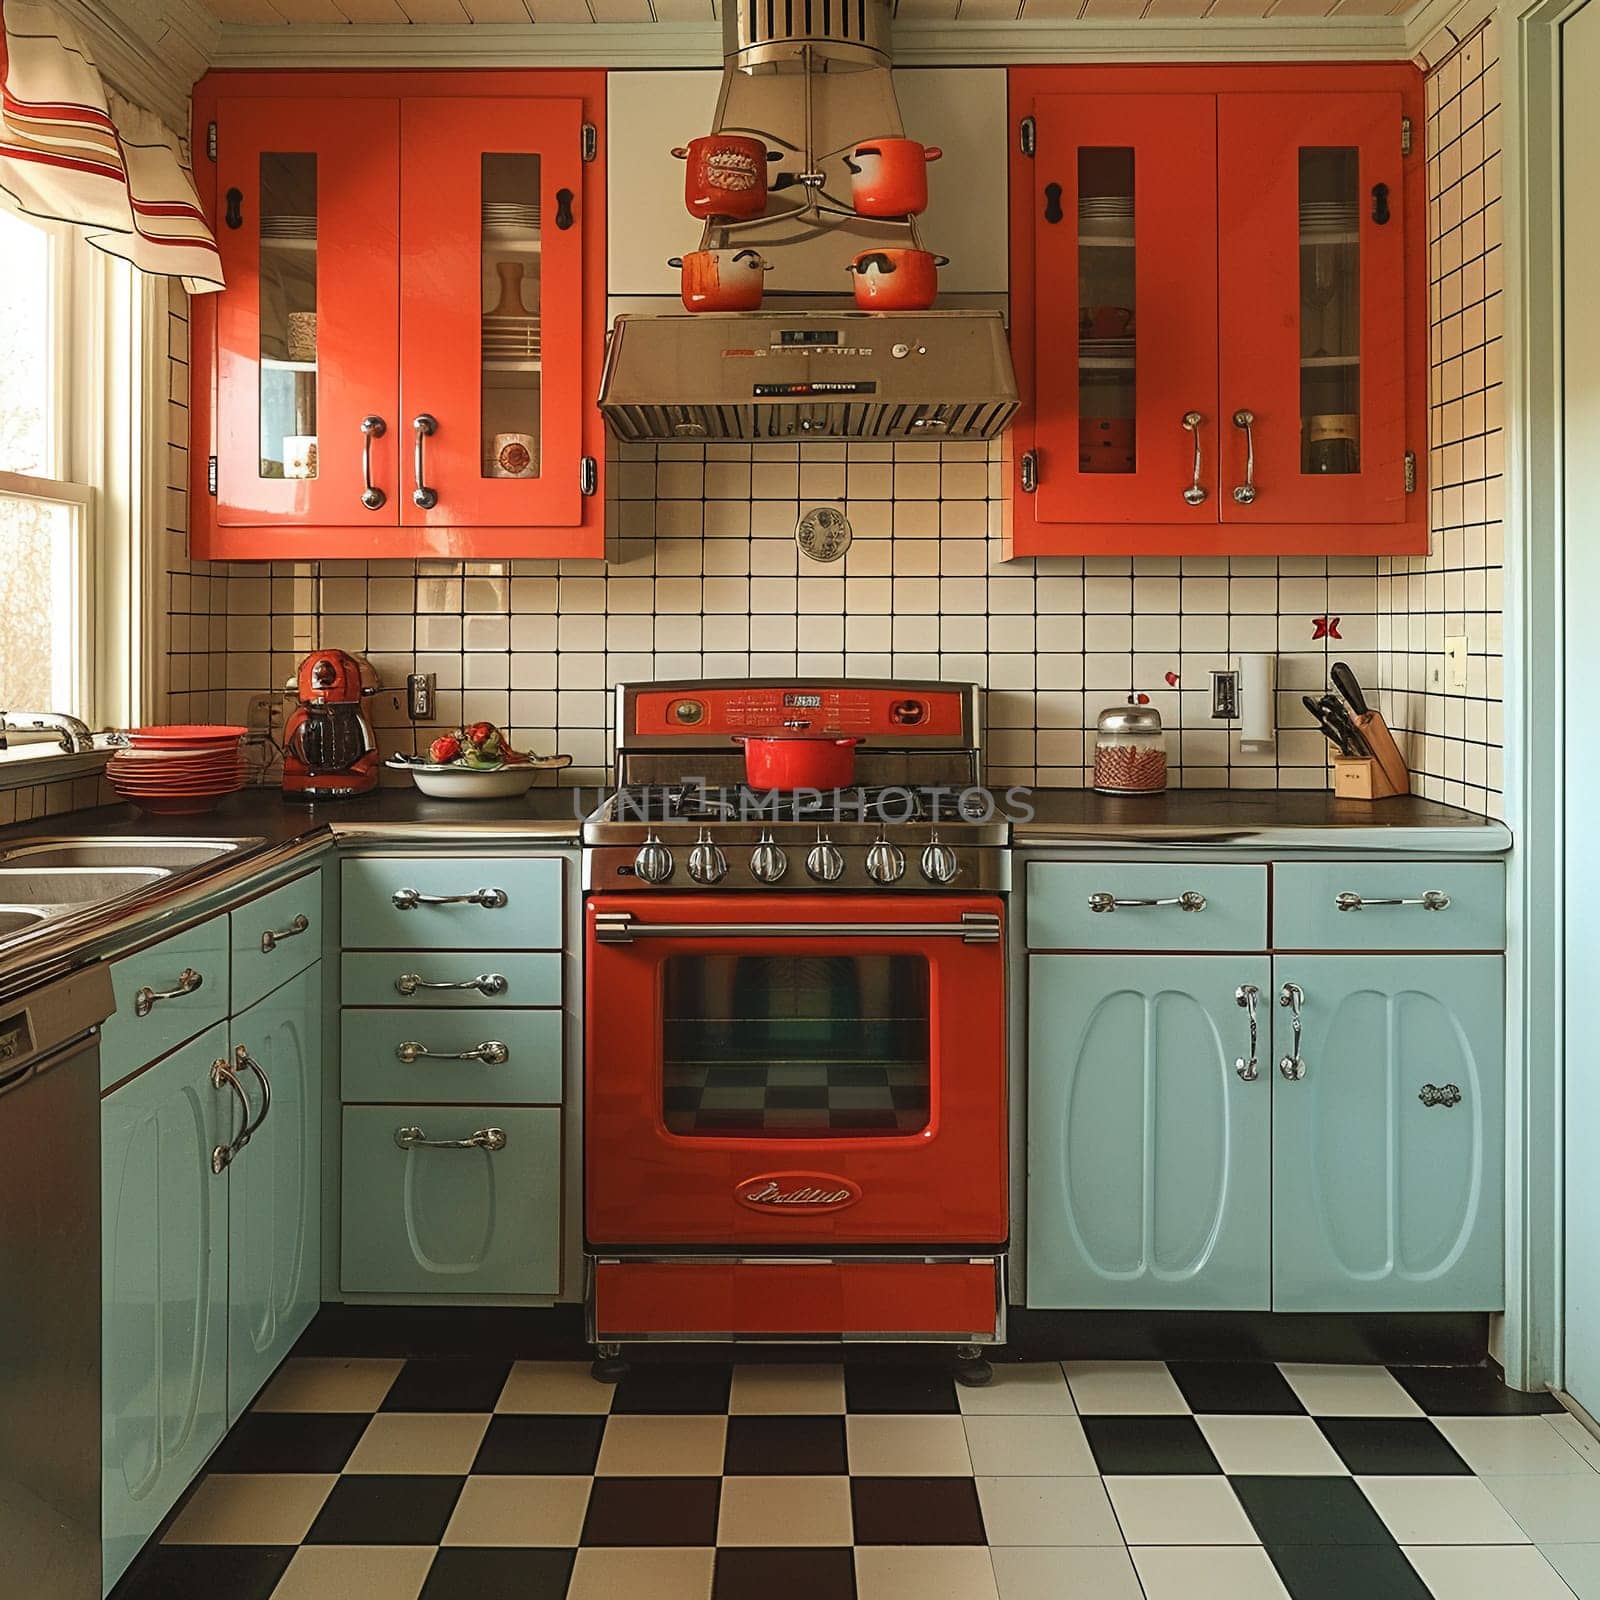 Vintage diner-inspired kitchen with checkered floors and retro appliancesHyperrealistic